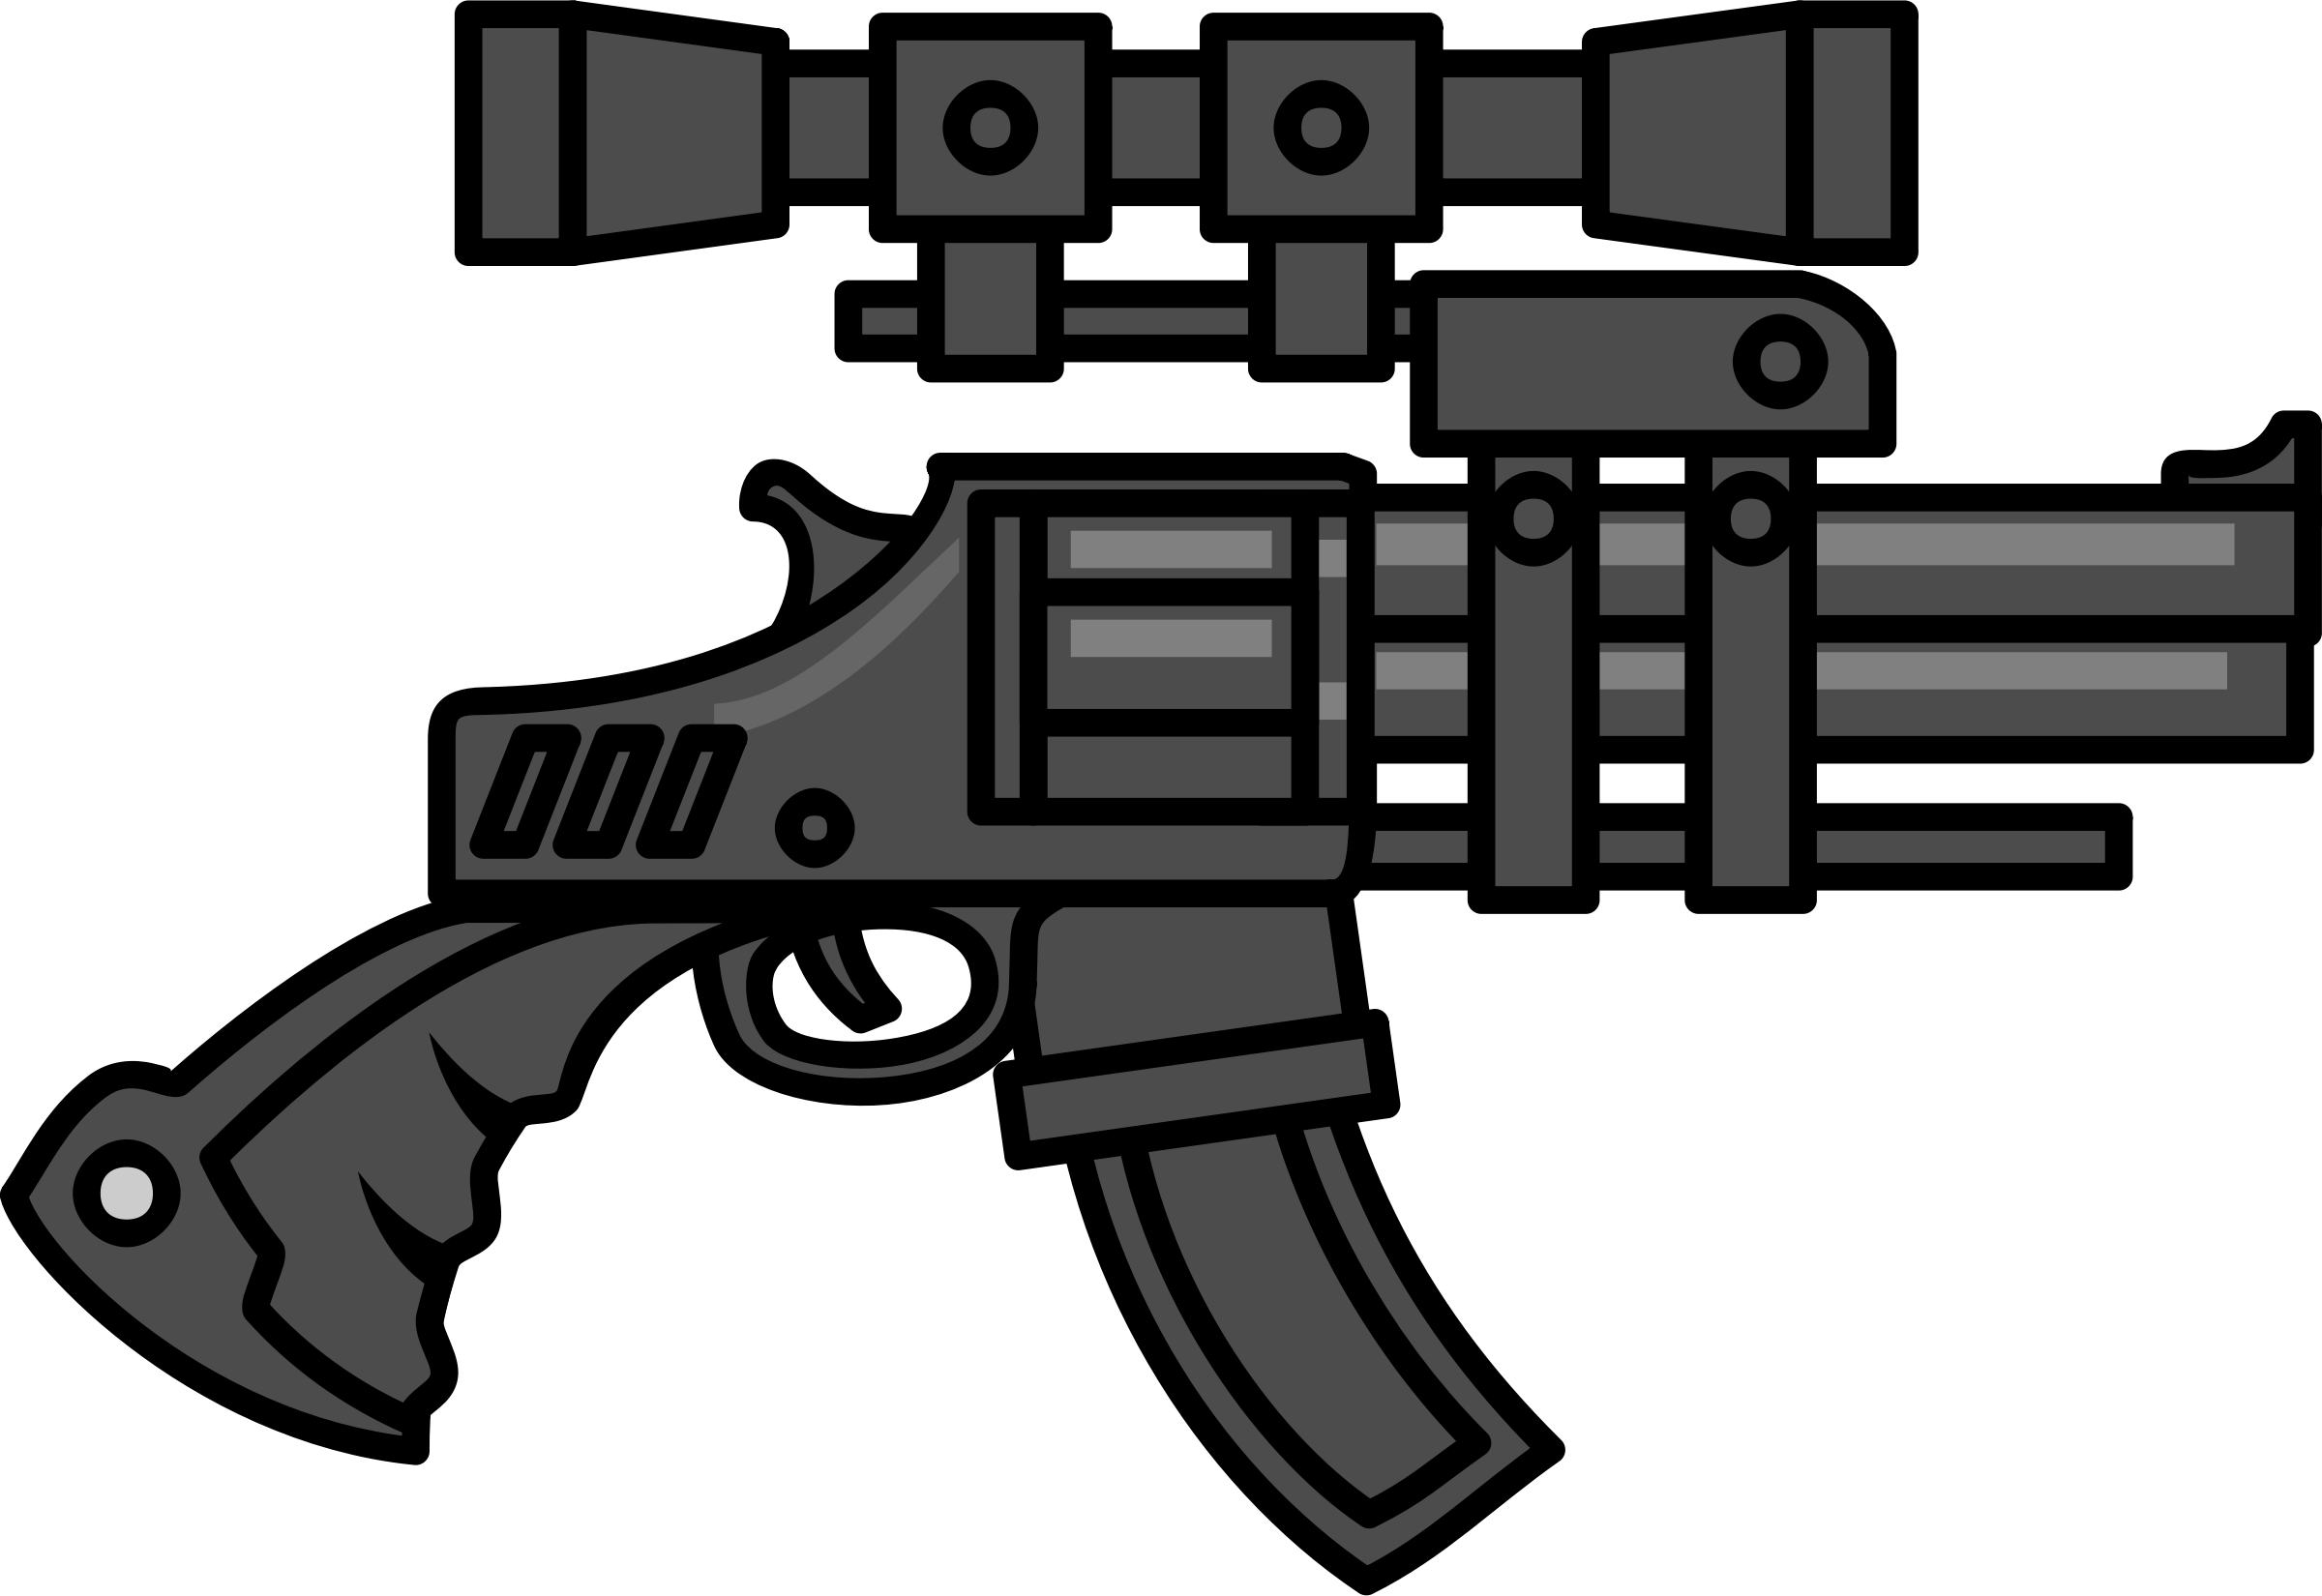 Big Gun with Scope vector clipart image - Free stock photo - Public Domain  photo - CC0 Images